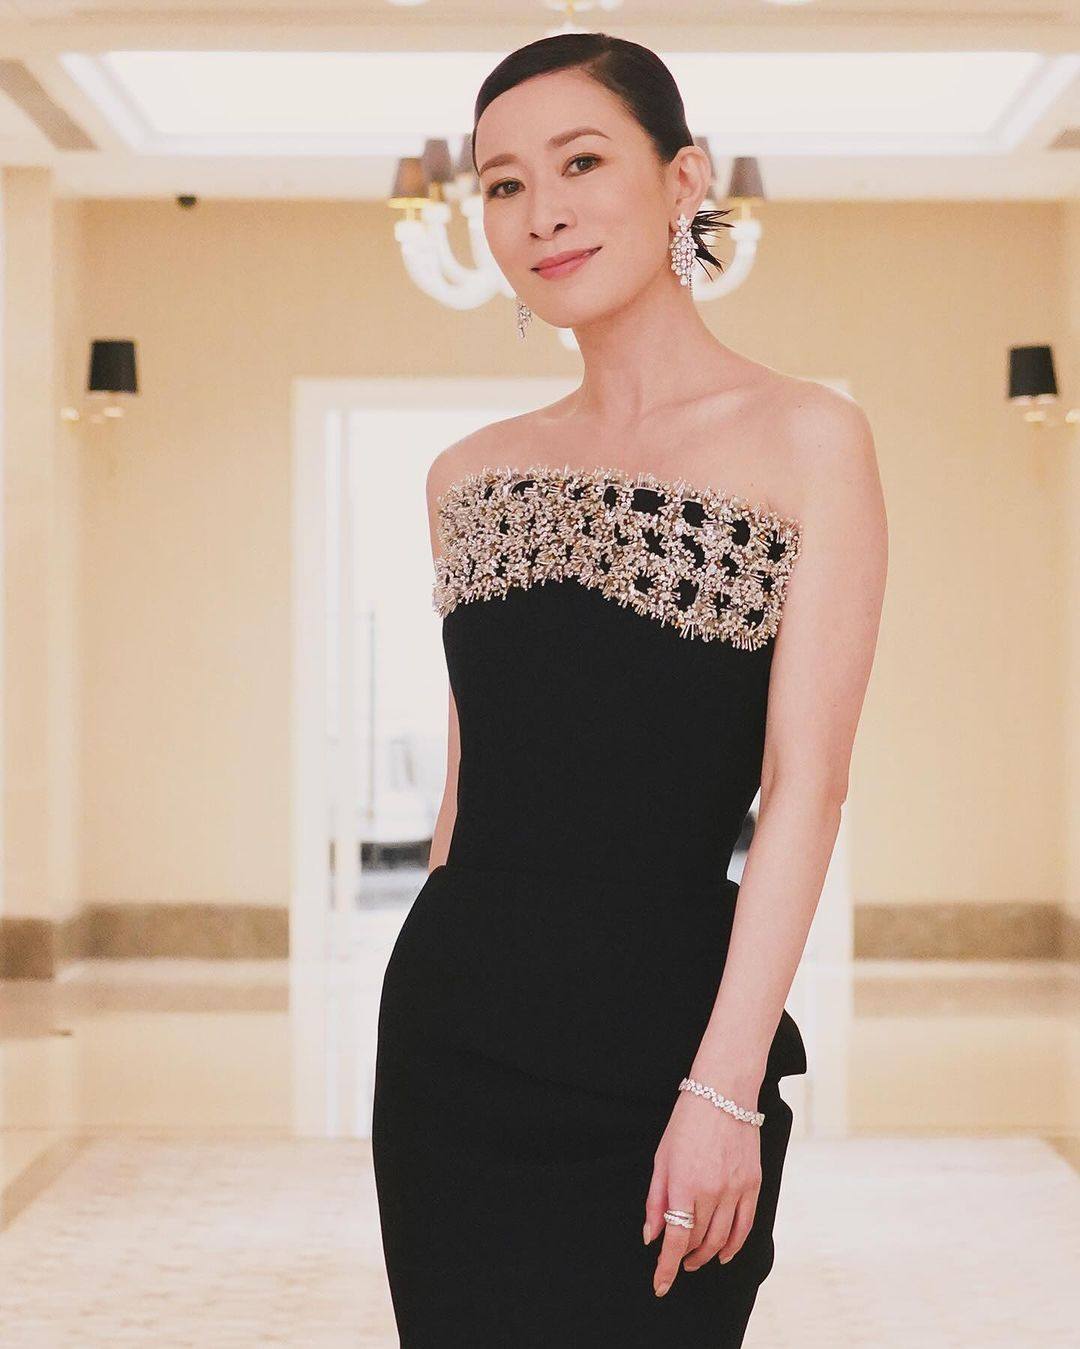 Queen of TVB: Hong Kong actress Charmaine Sheh Sze-man has starred in hit shows and modelled Tiffany & Co. jewellery. Photo: @charmaine_sheh/Instagram